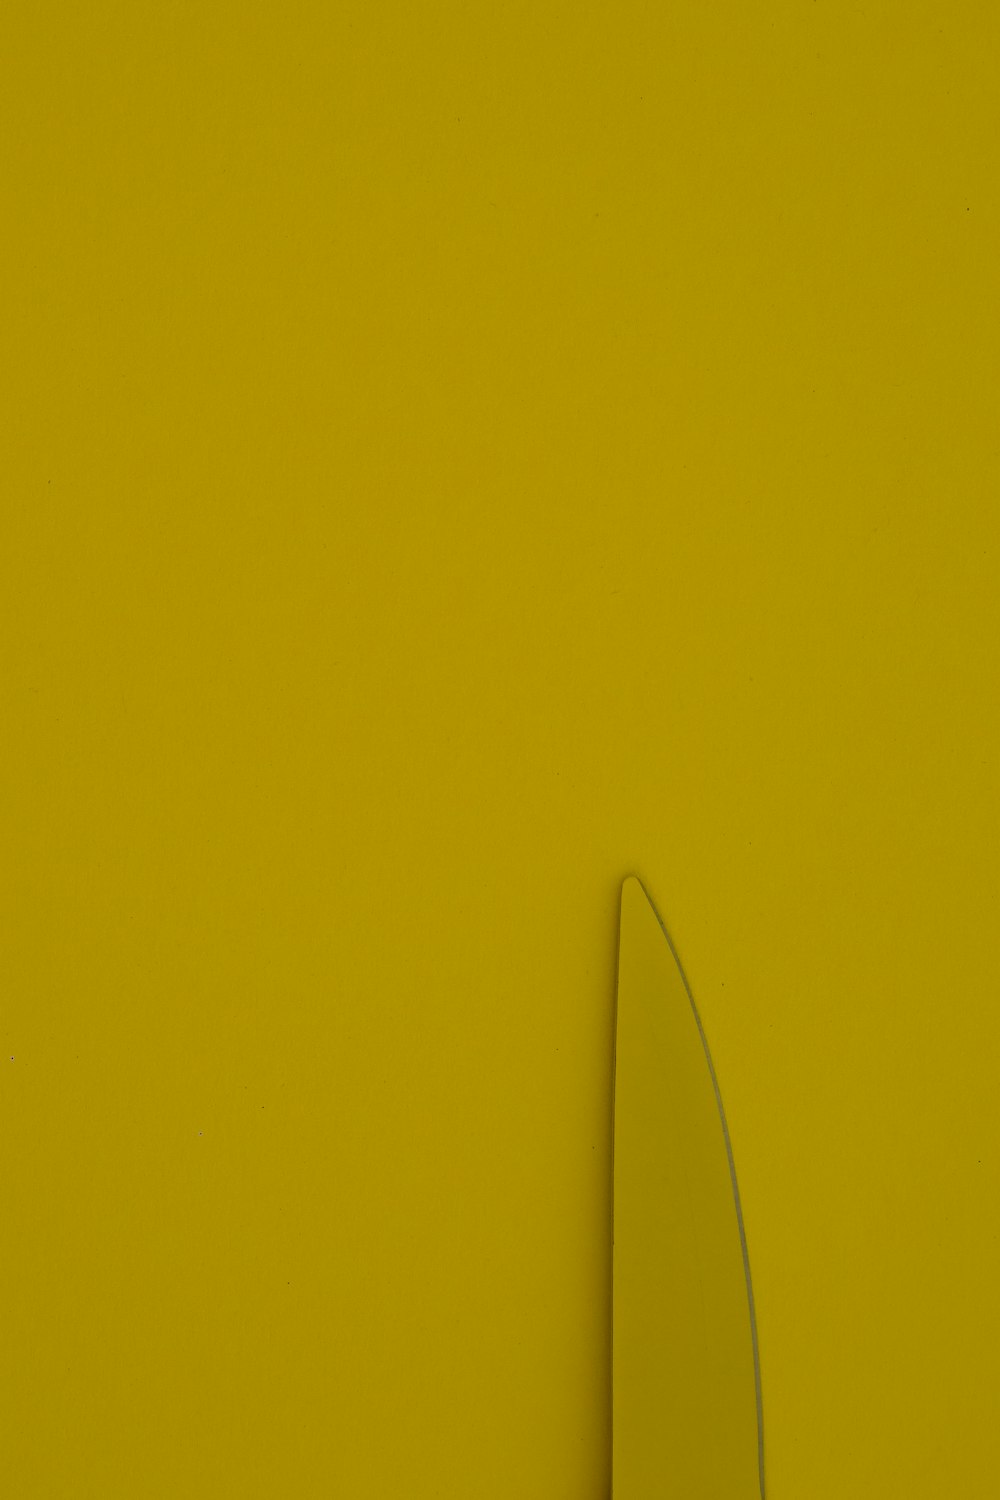 yellow wall with black wire